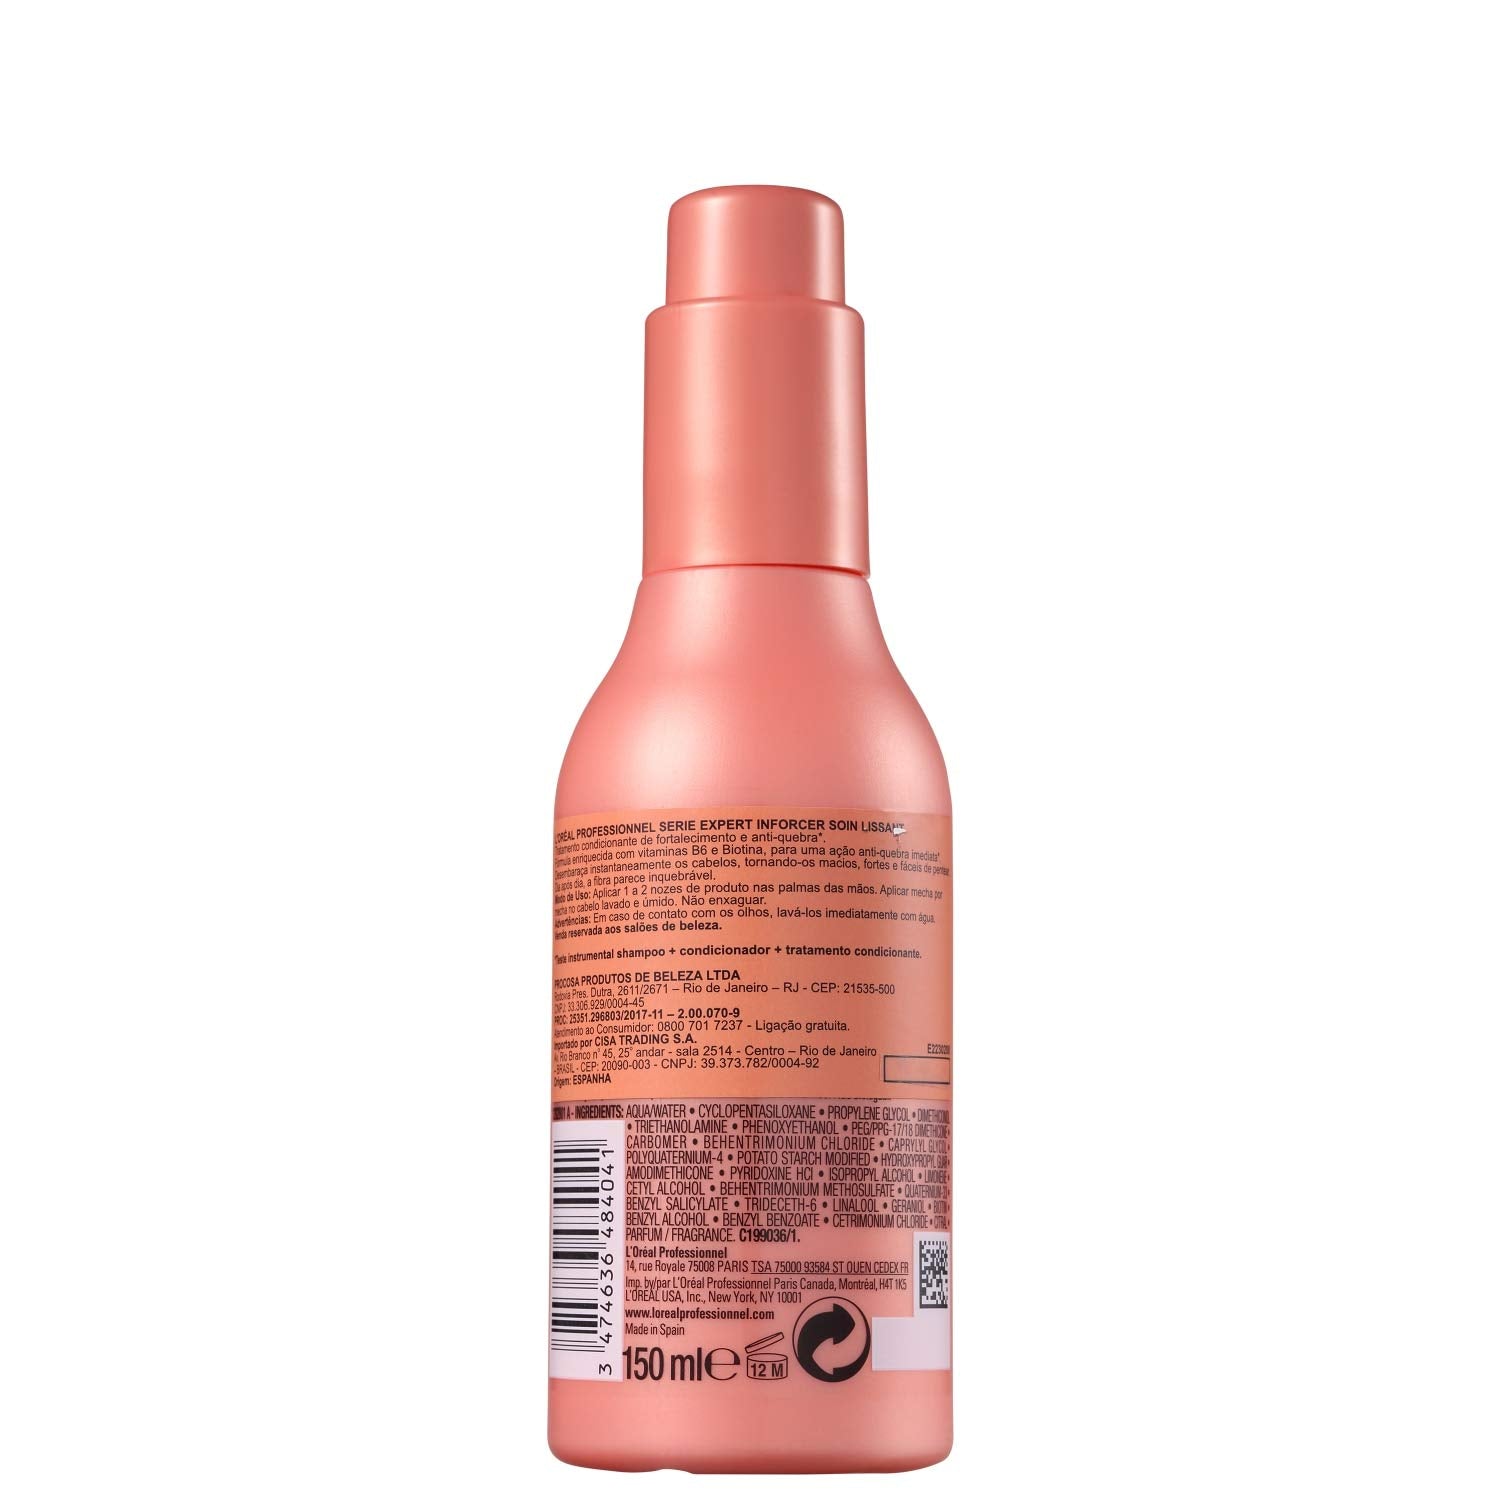 L'Oreal Professionnel Serie Expert Inforcer B6 + Biotin Inforcer Smoothing Leave In Cream (150 ml) L'Oréal Professionnel